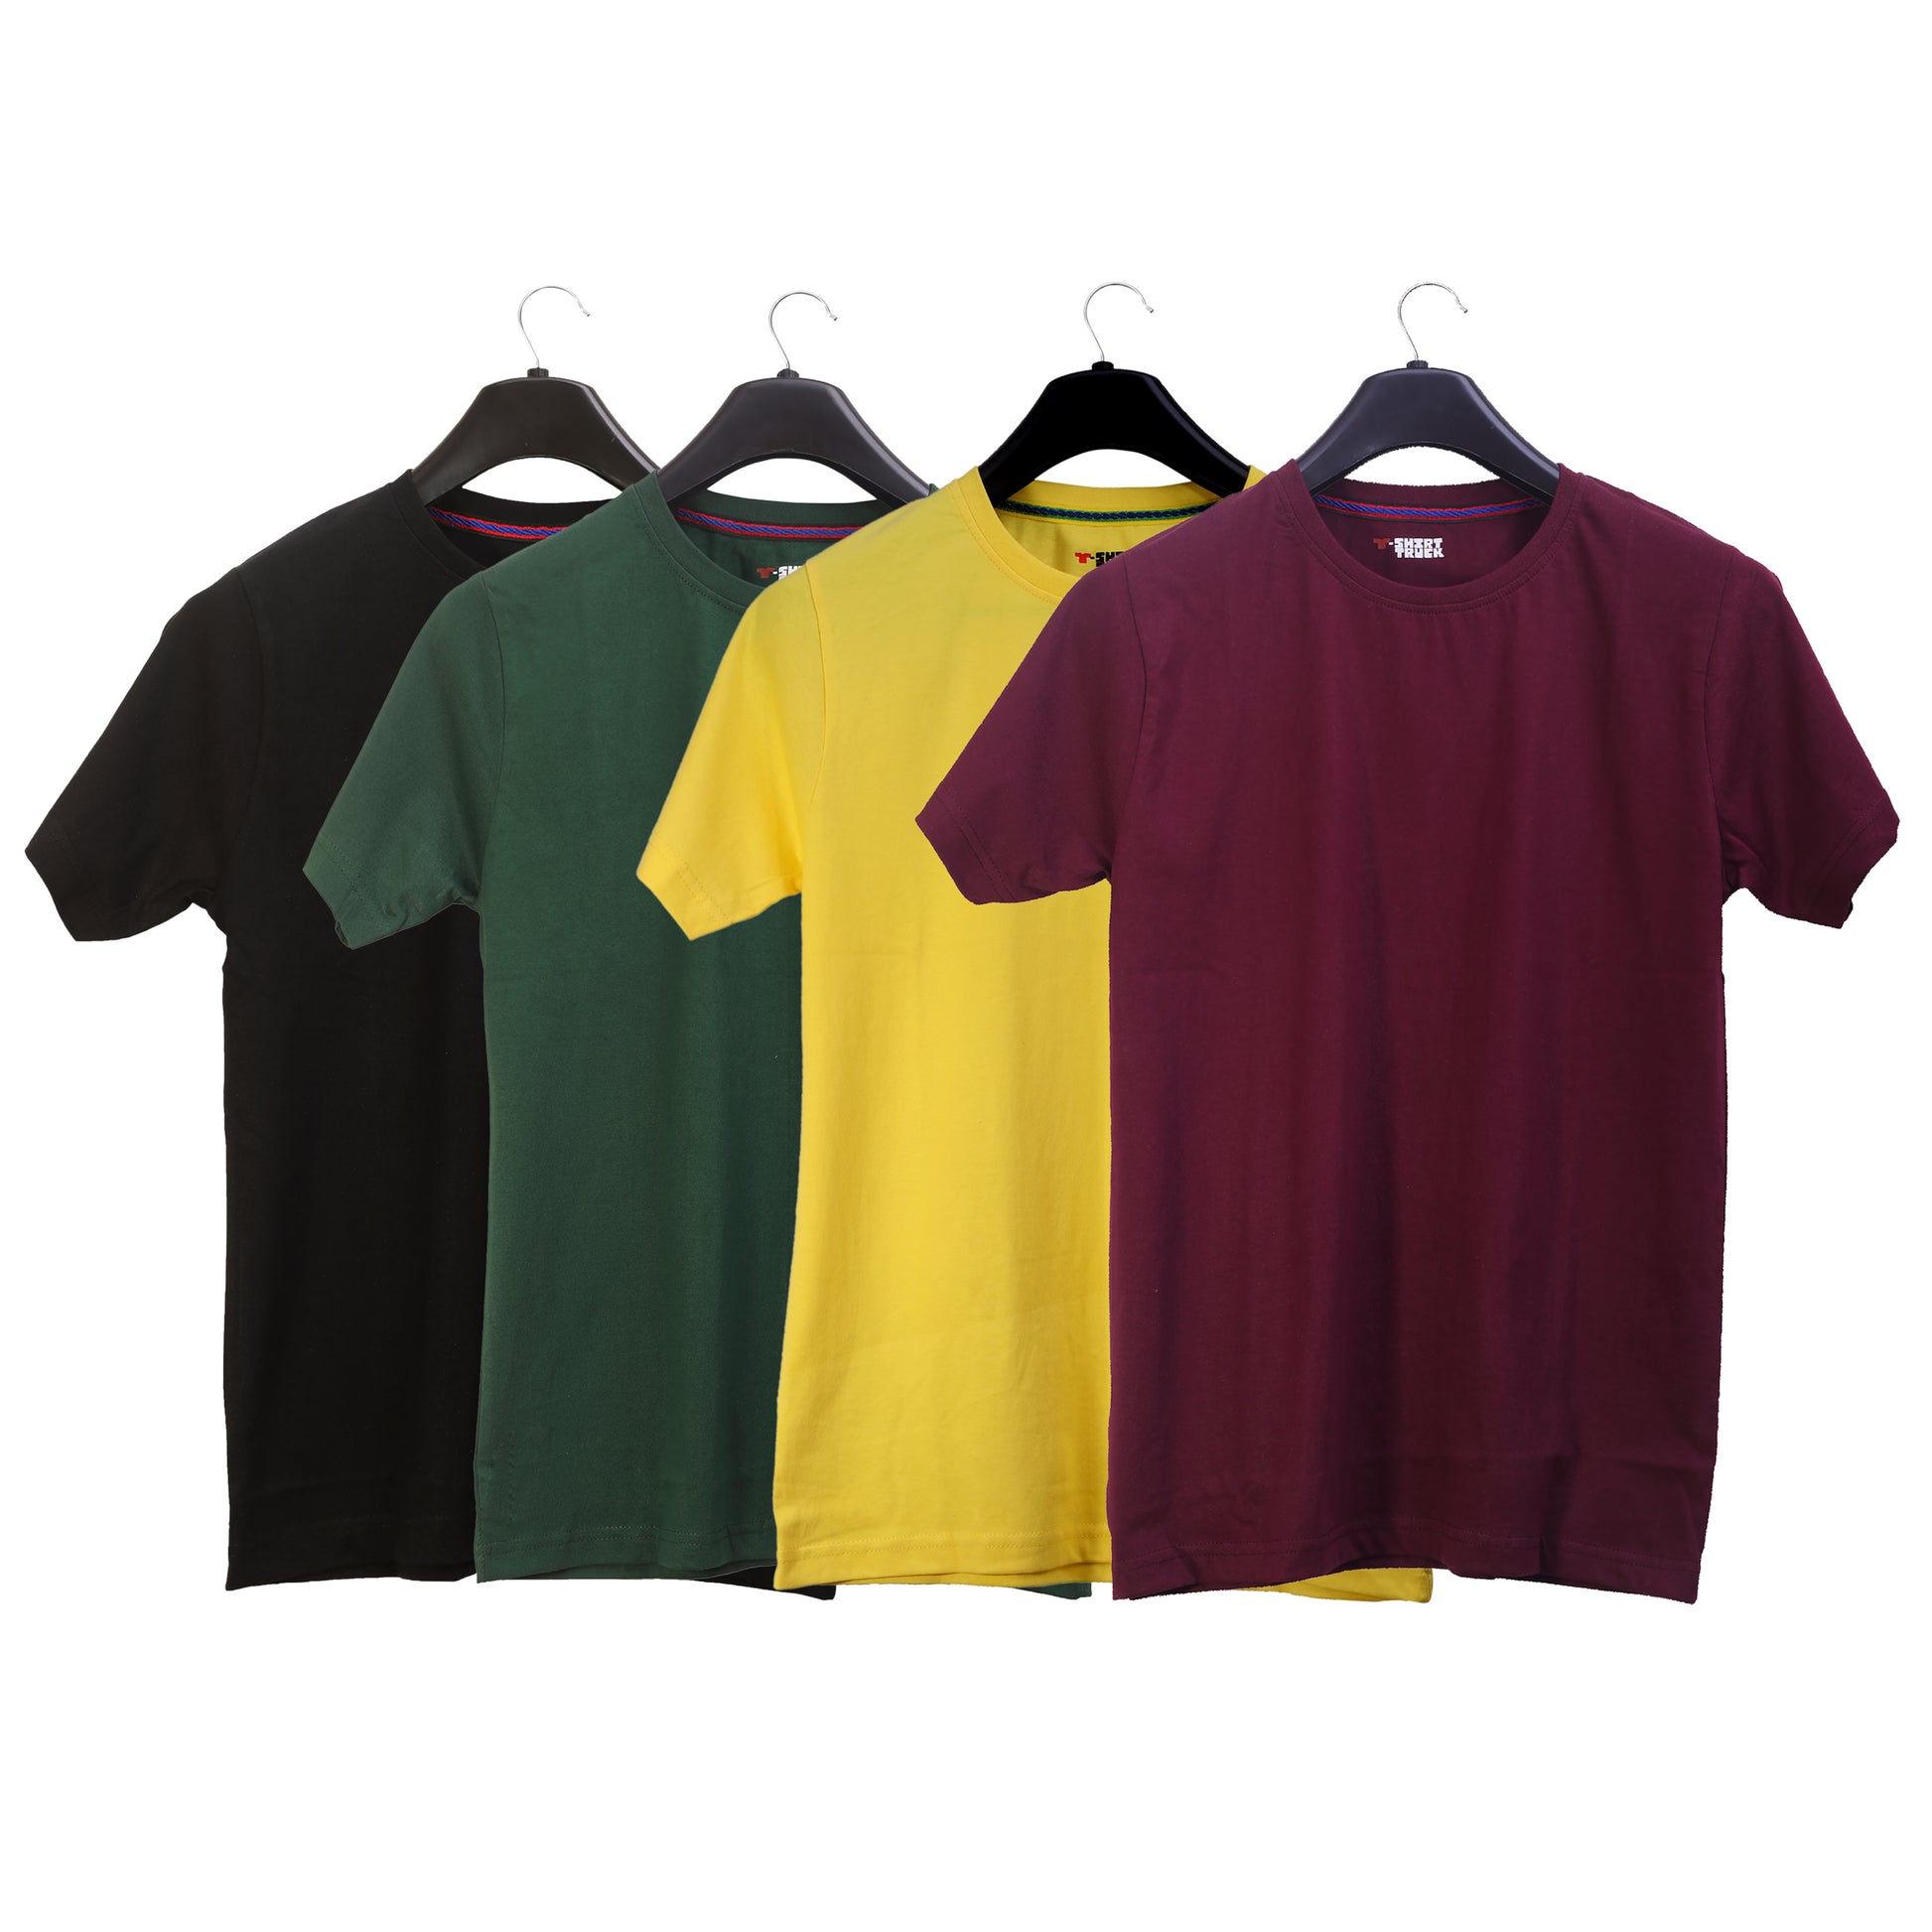 Unisex Round Neck Plain Solid Combo Pack of 4 T-shirts Black, Green, Yellow & Maroon